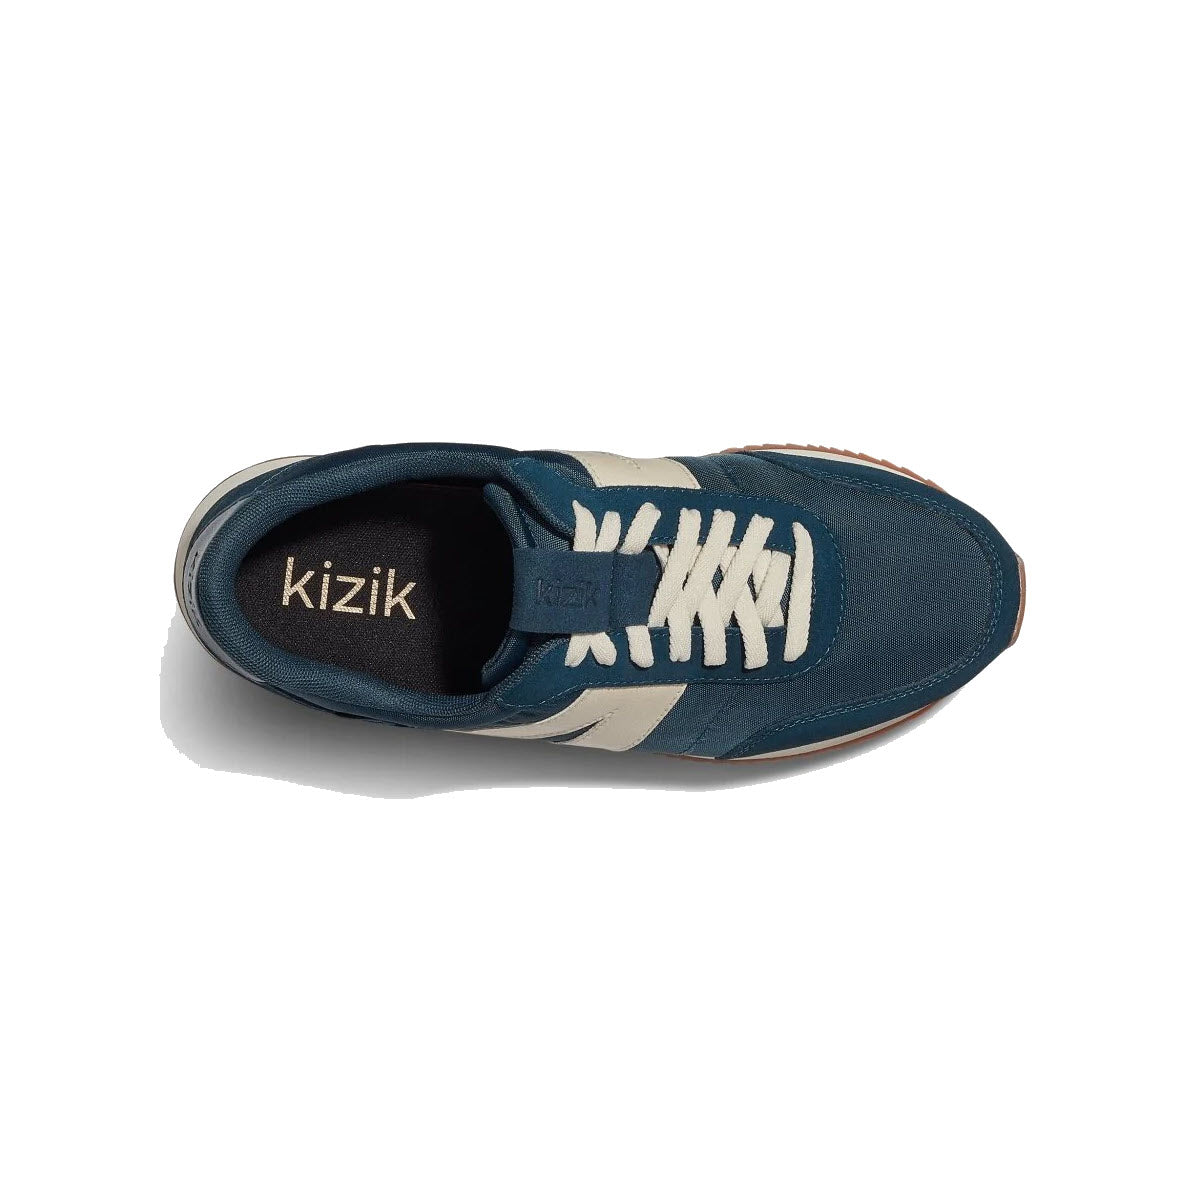 Top view of a navy blue and white KIZIK MILAN TIDEPOOL - ADULT hands-free sneaker on a white background.